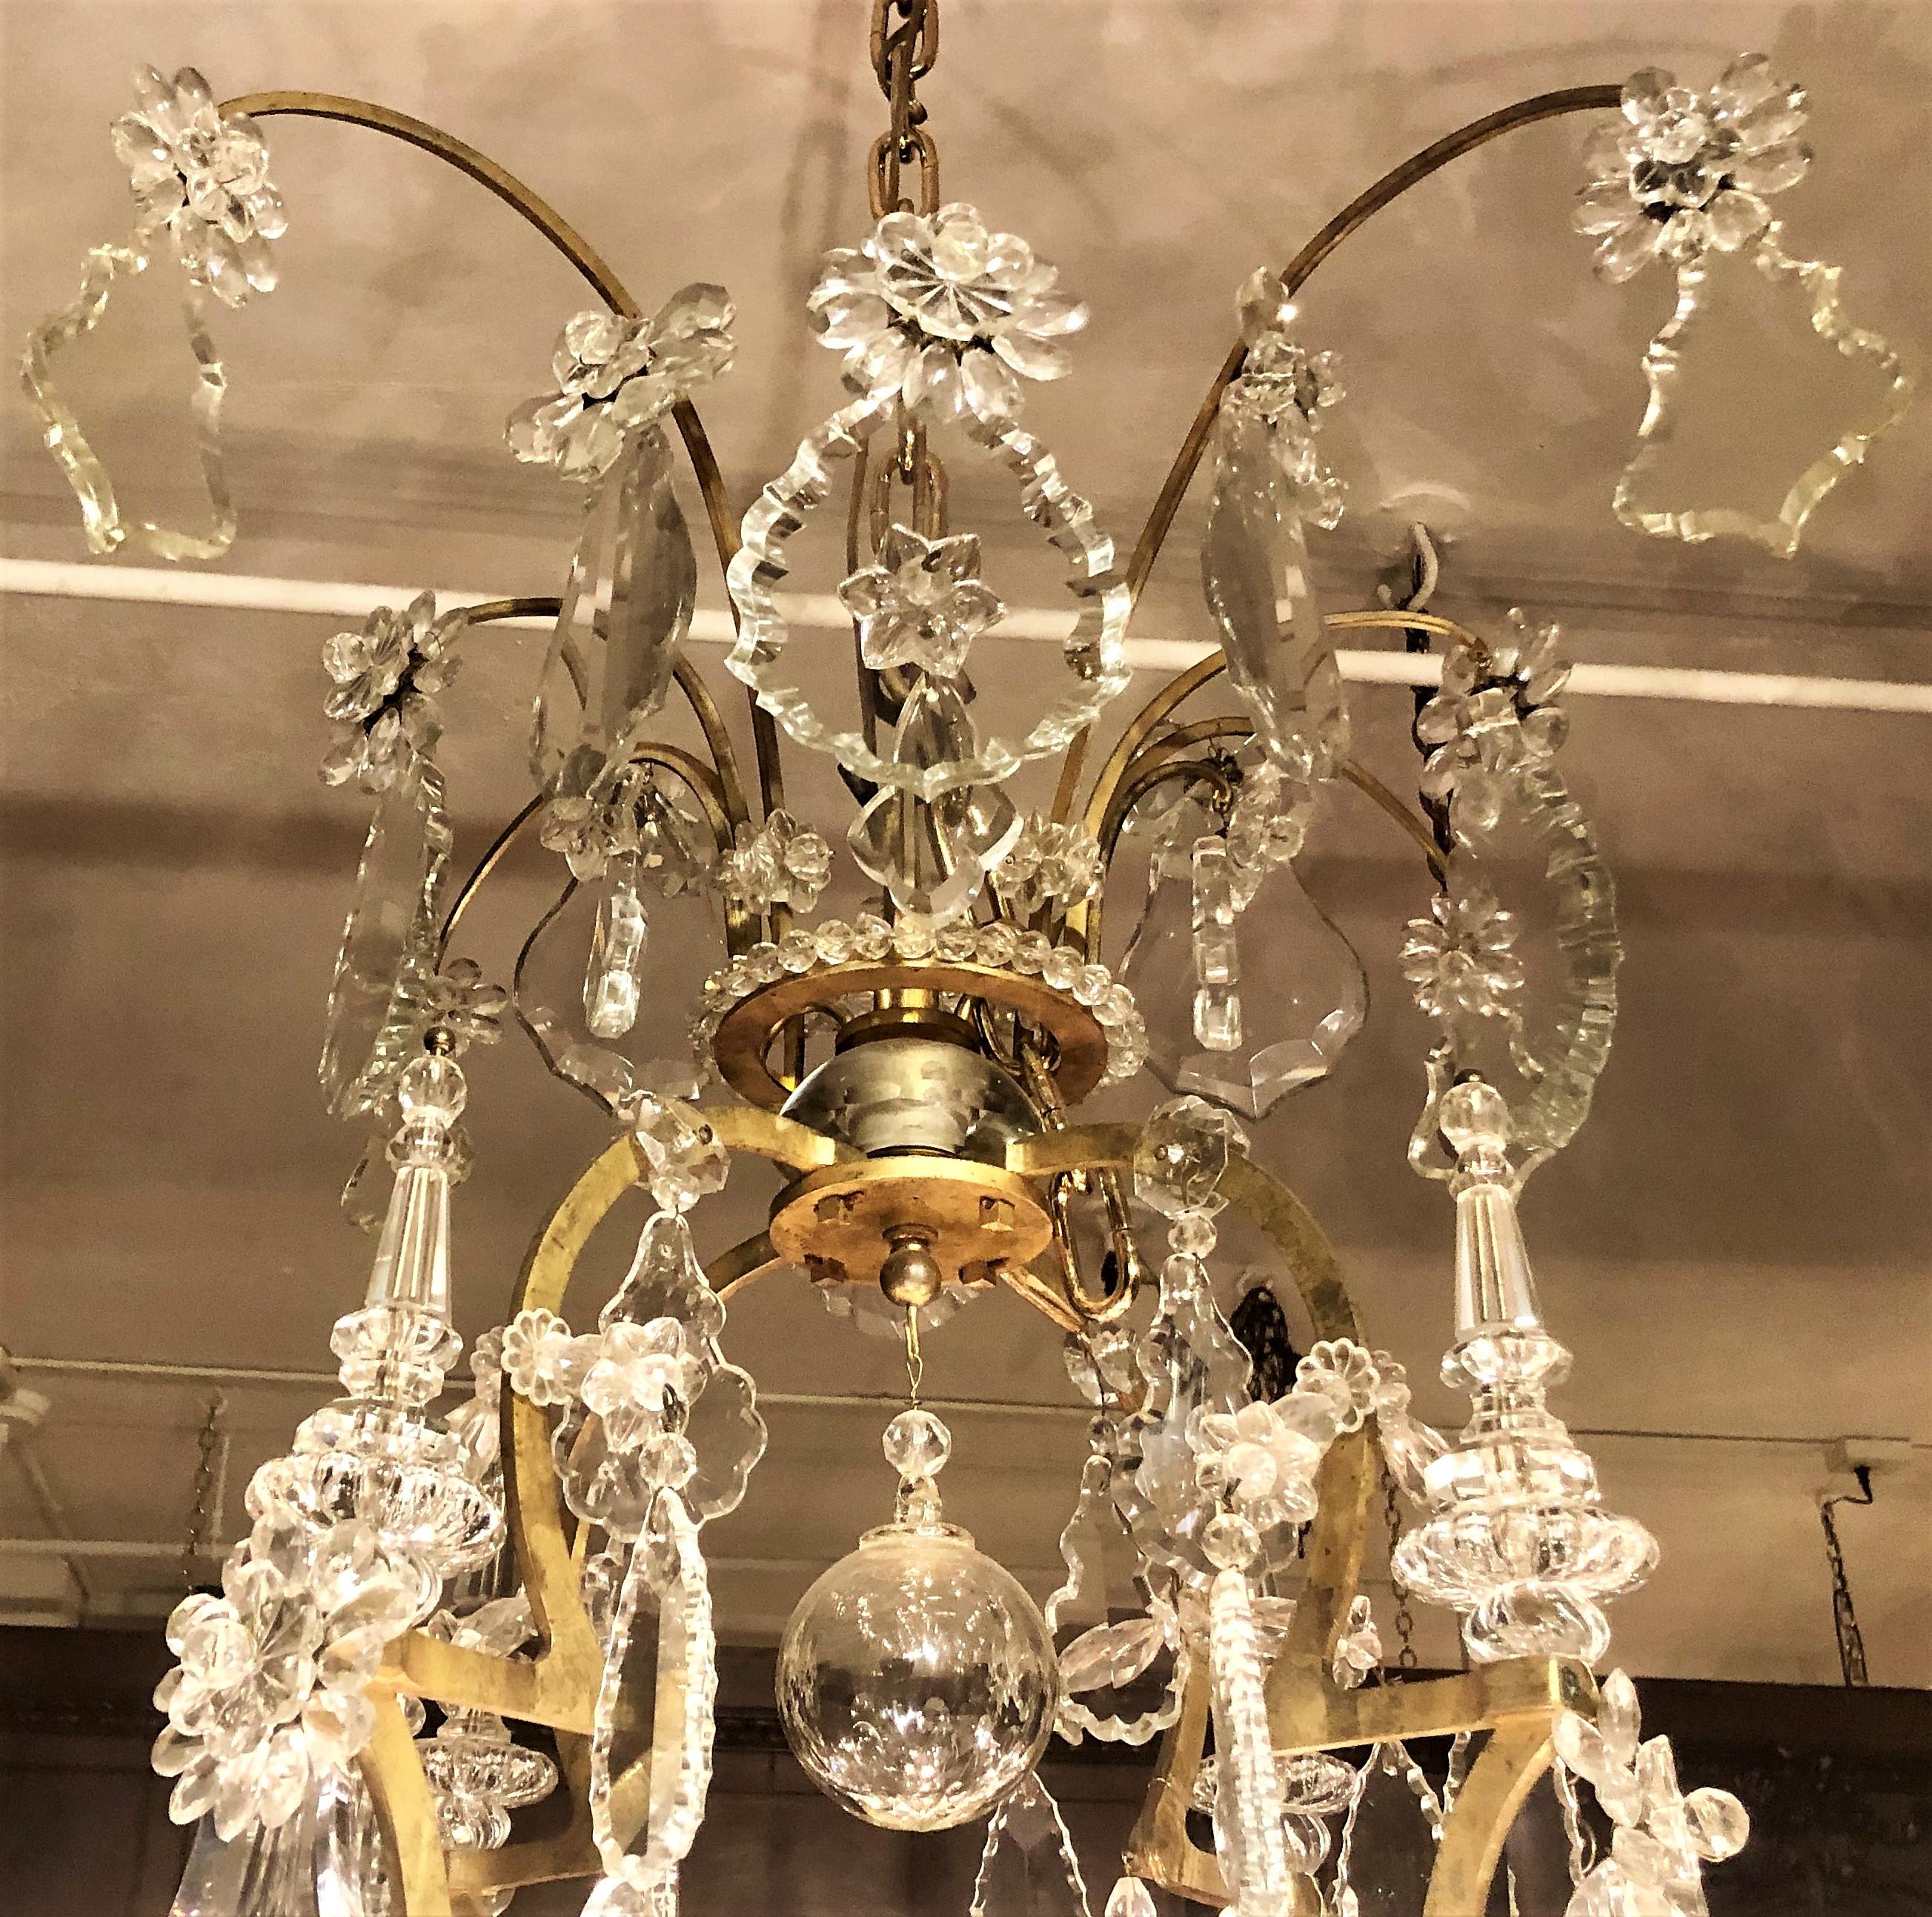 Antique French Baccarat crystal and bronze D'Ore versailles chandelier, circa 1880.